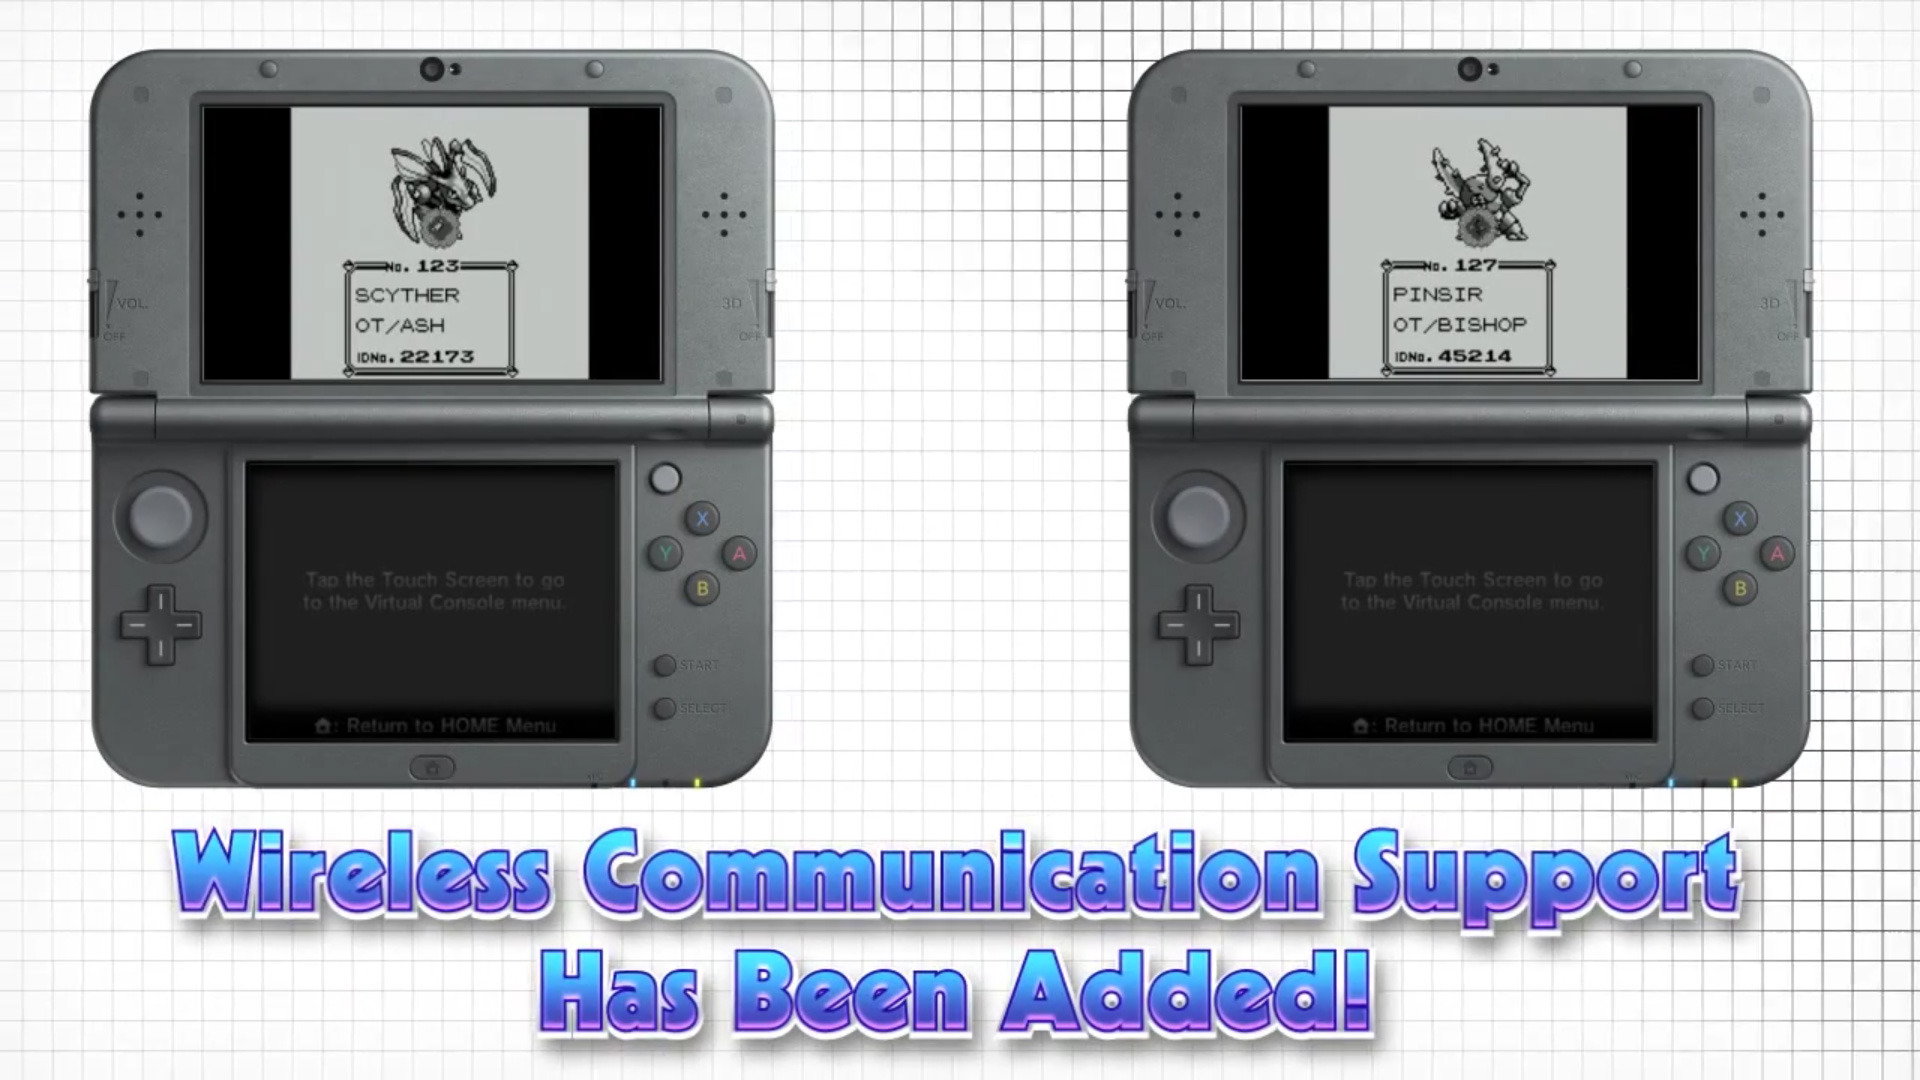 Pokémon Red, Blue & Yellow Are Coming To The 3DS Virtual Console